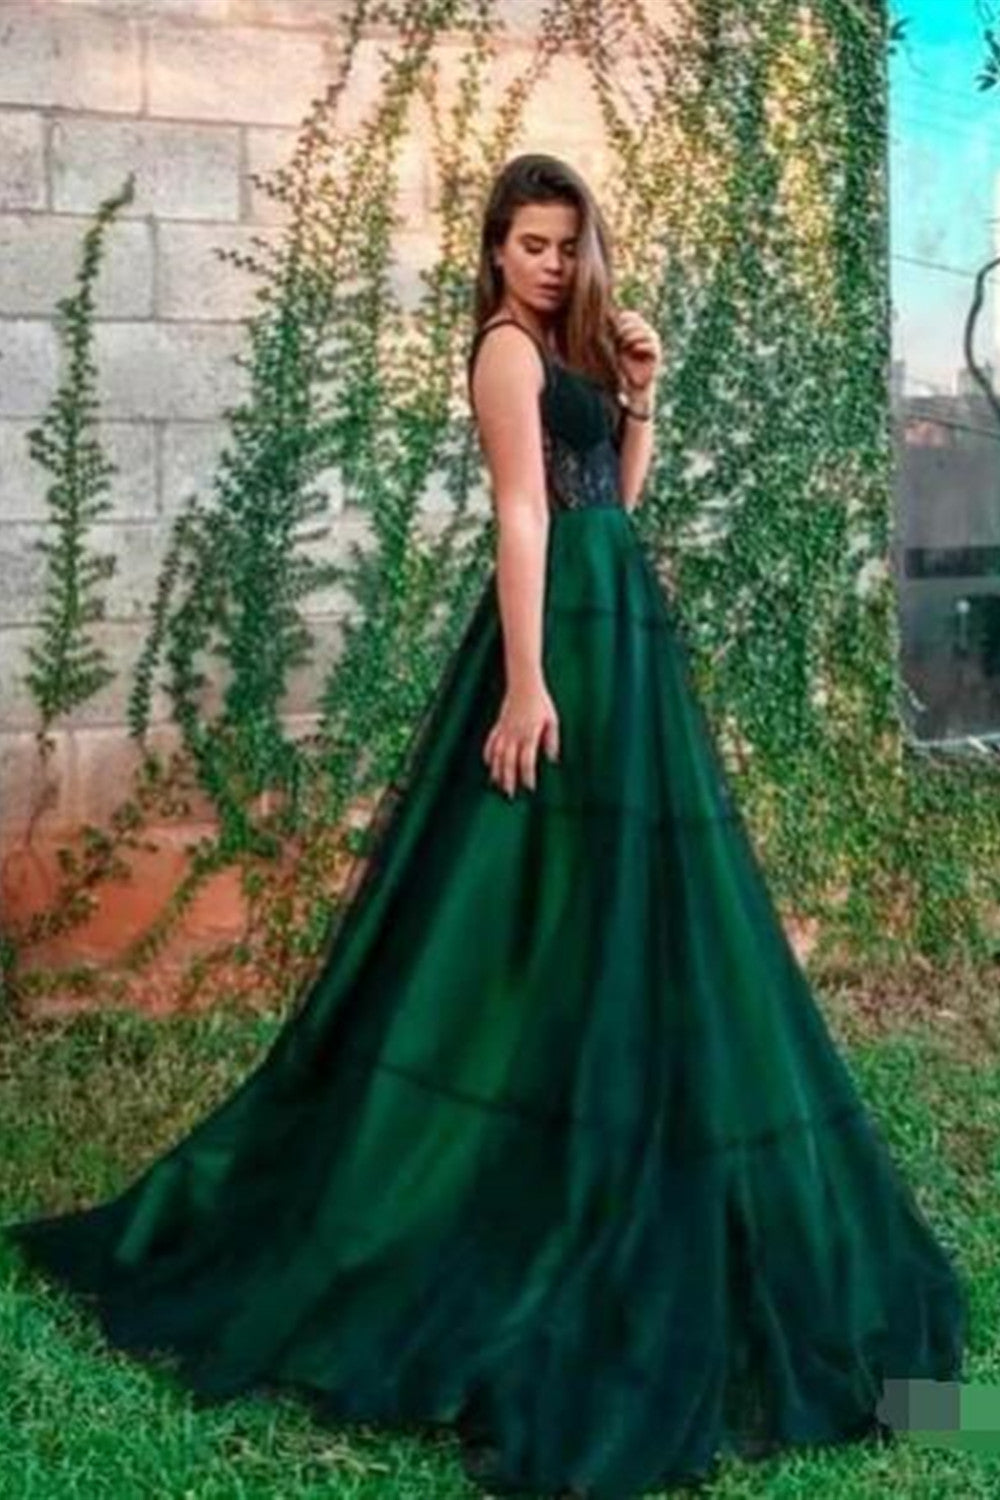 Emerald Green Color A-line Newest Prom Dresses, Stylish Lace Tulle Long Prom Dresses 2022. Wedding Guest Party Dresses